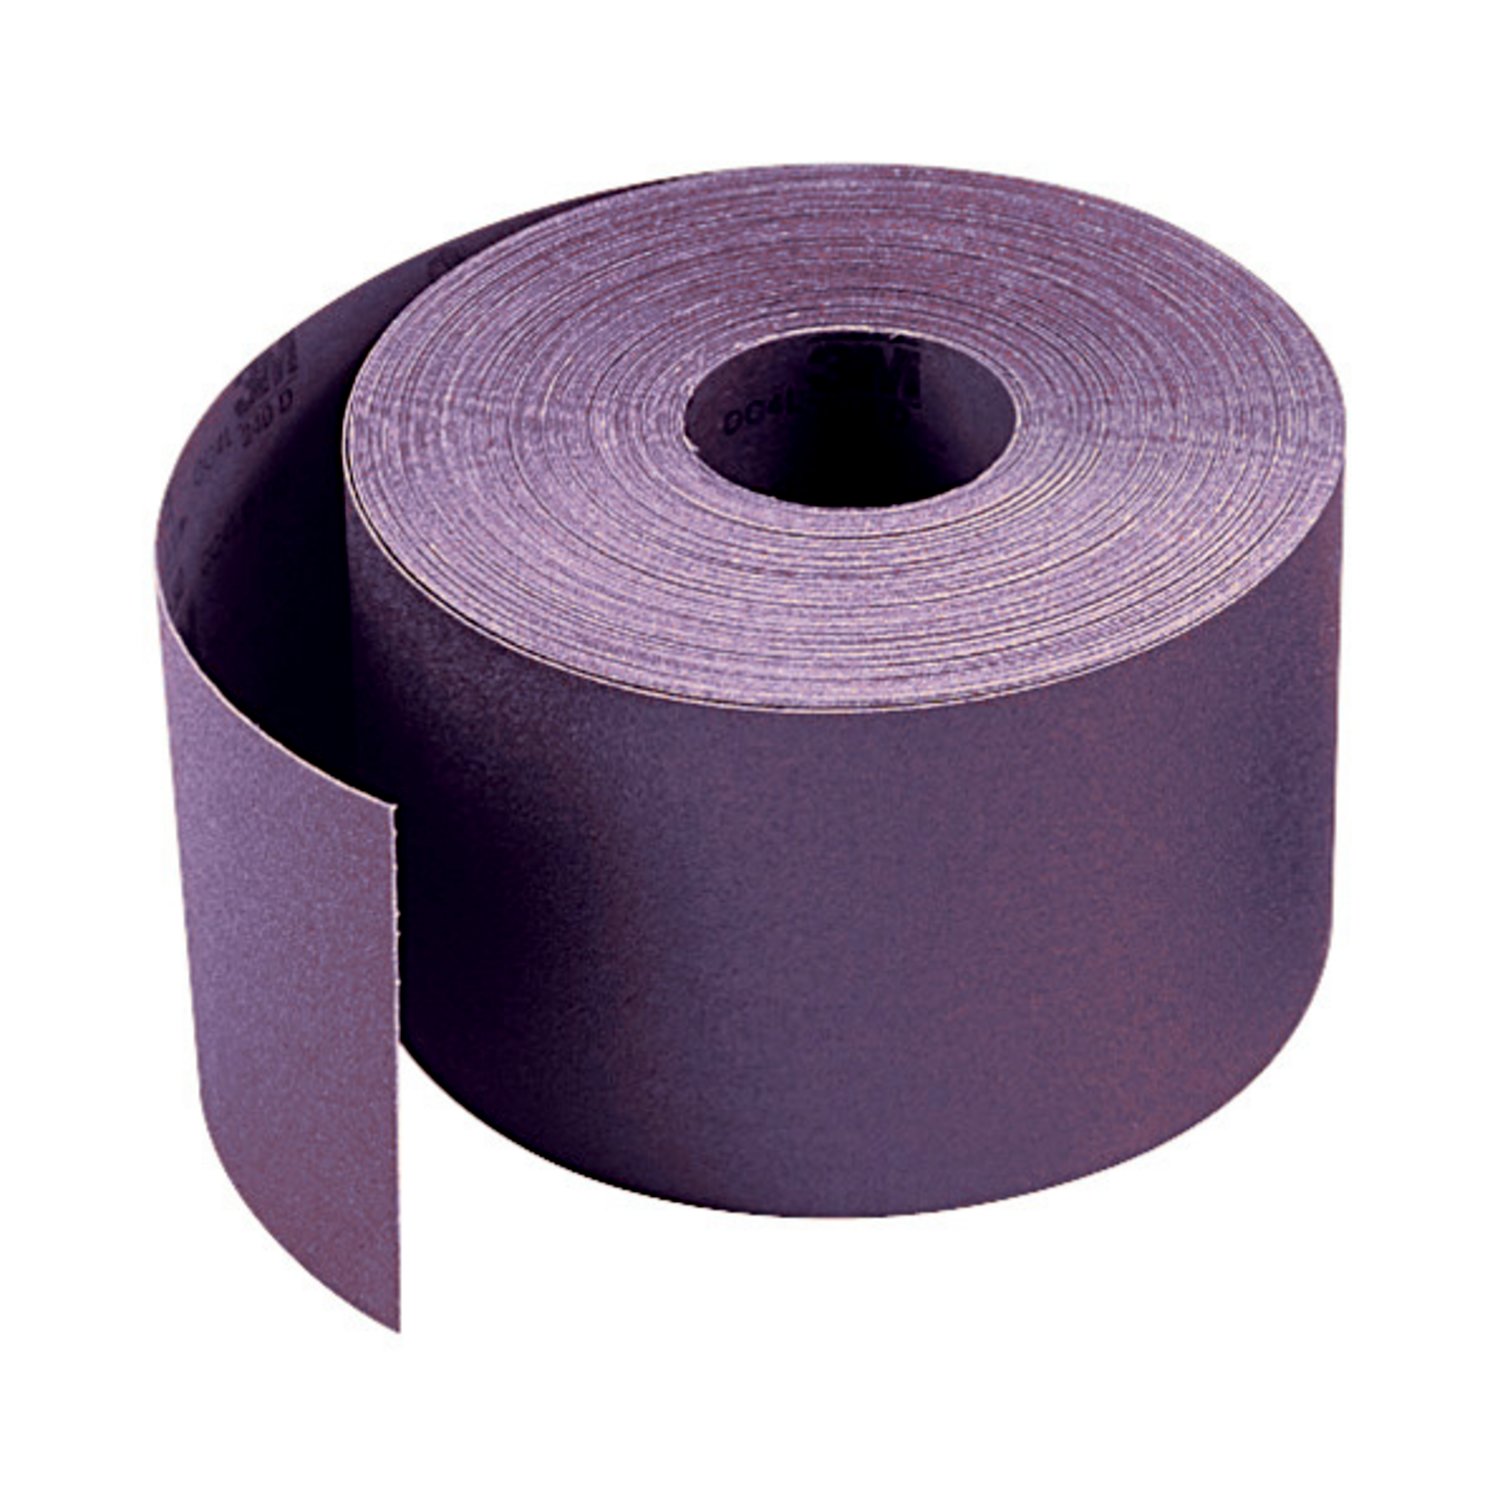 7100229459 - 3M Cubitron II Film Roll 775L, 150+ YF-weight, 17-3/4 in x 23 yd, ASO,
No Flex, Continuous Length - No splices